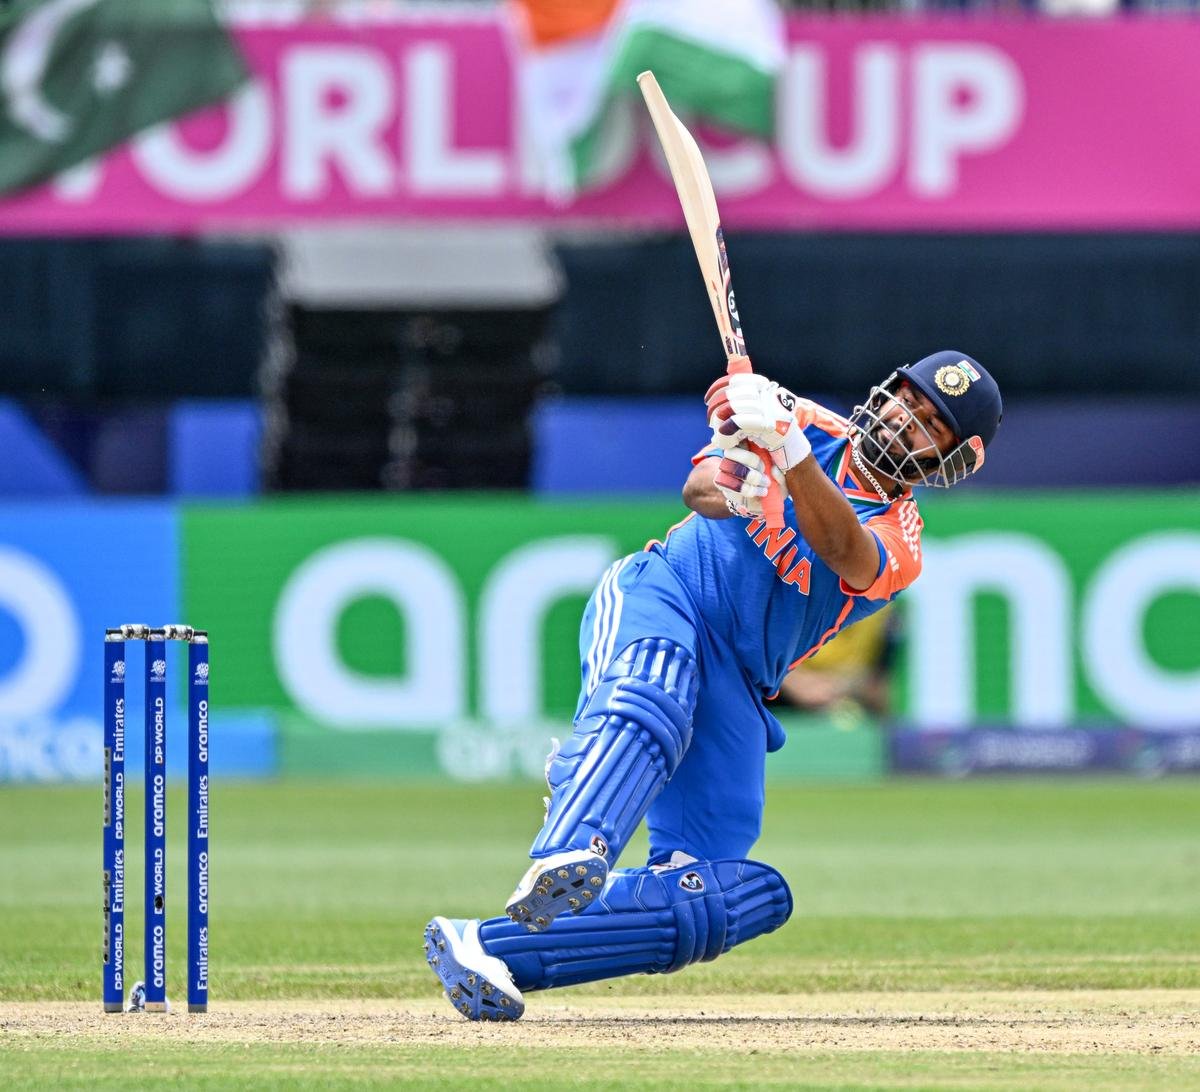 This was destined to be Rishabh Pant’s day, who went on to score a crucial 31-ball 42.